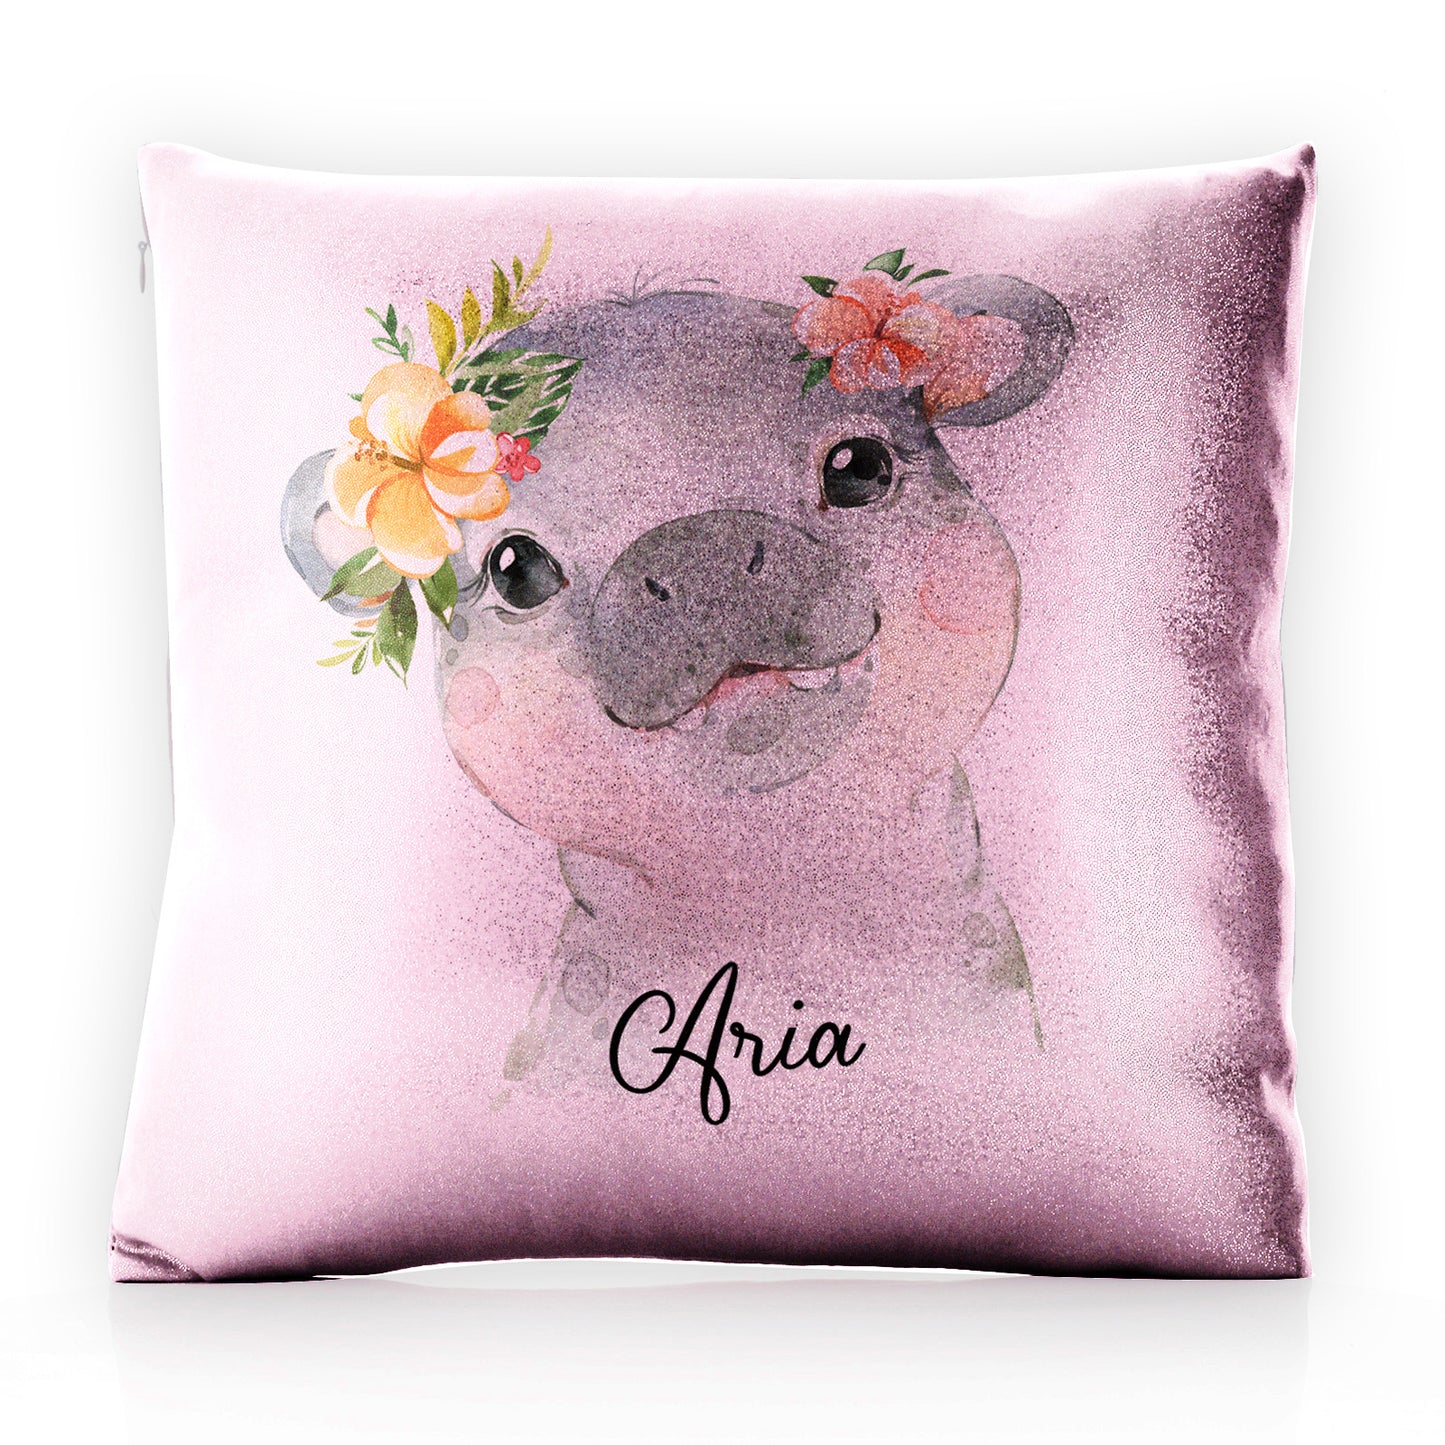 Personalised Glitter Cushion with Hippo Peach Flowers and Cute Text